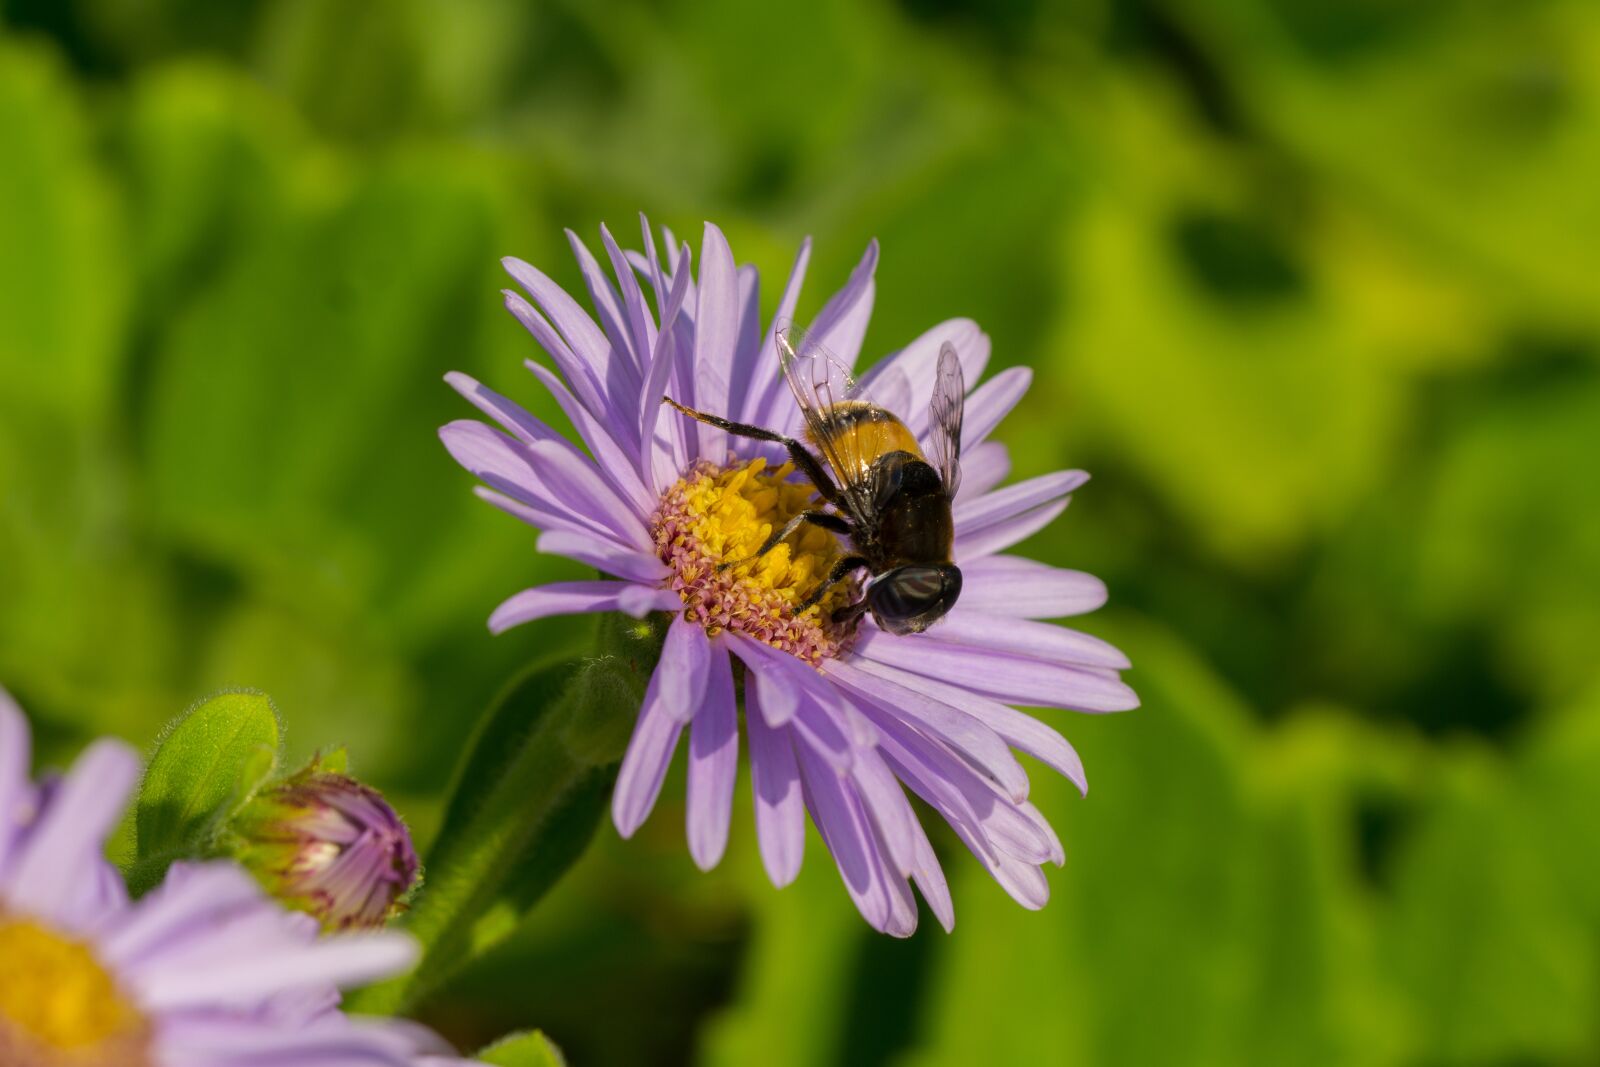 Sony a6000 sample photo. Hoverfly, flowers, insects photography